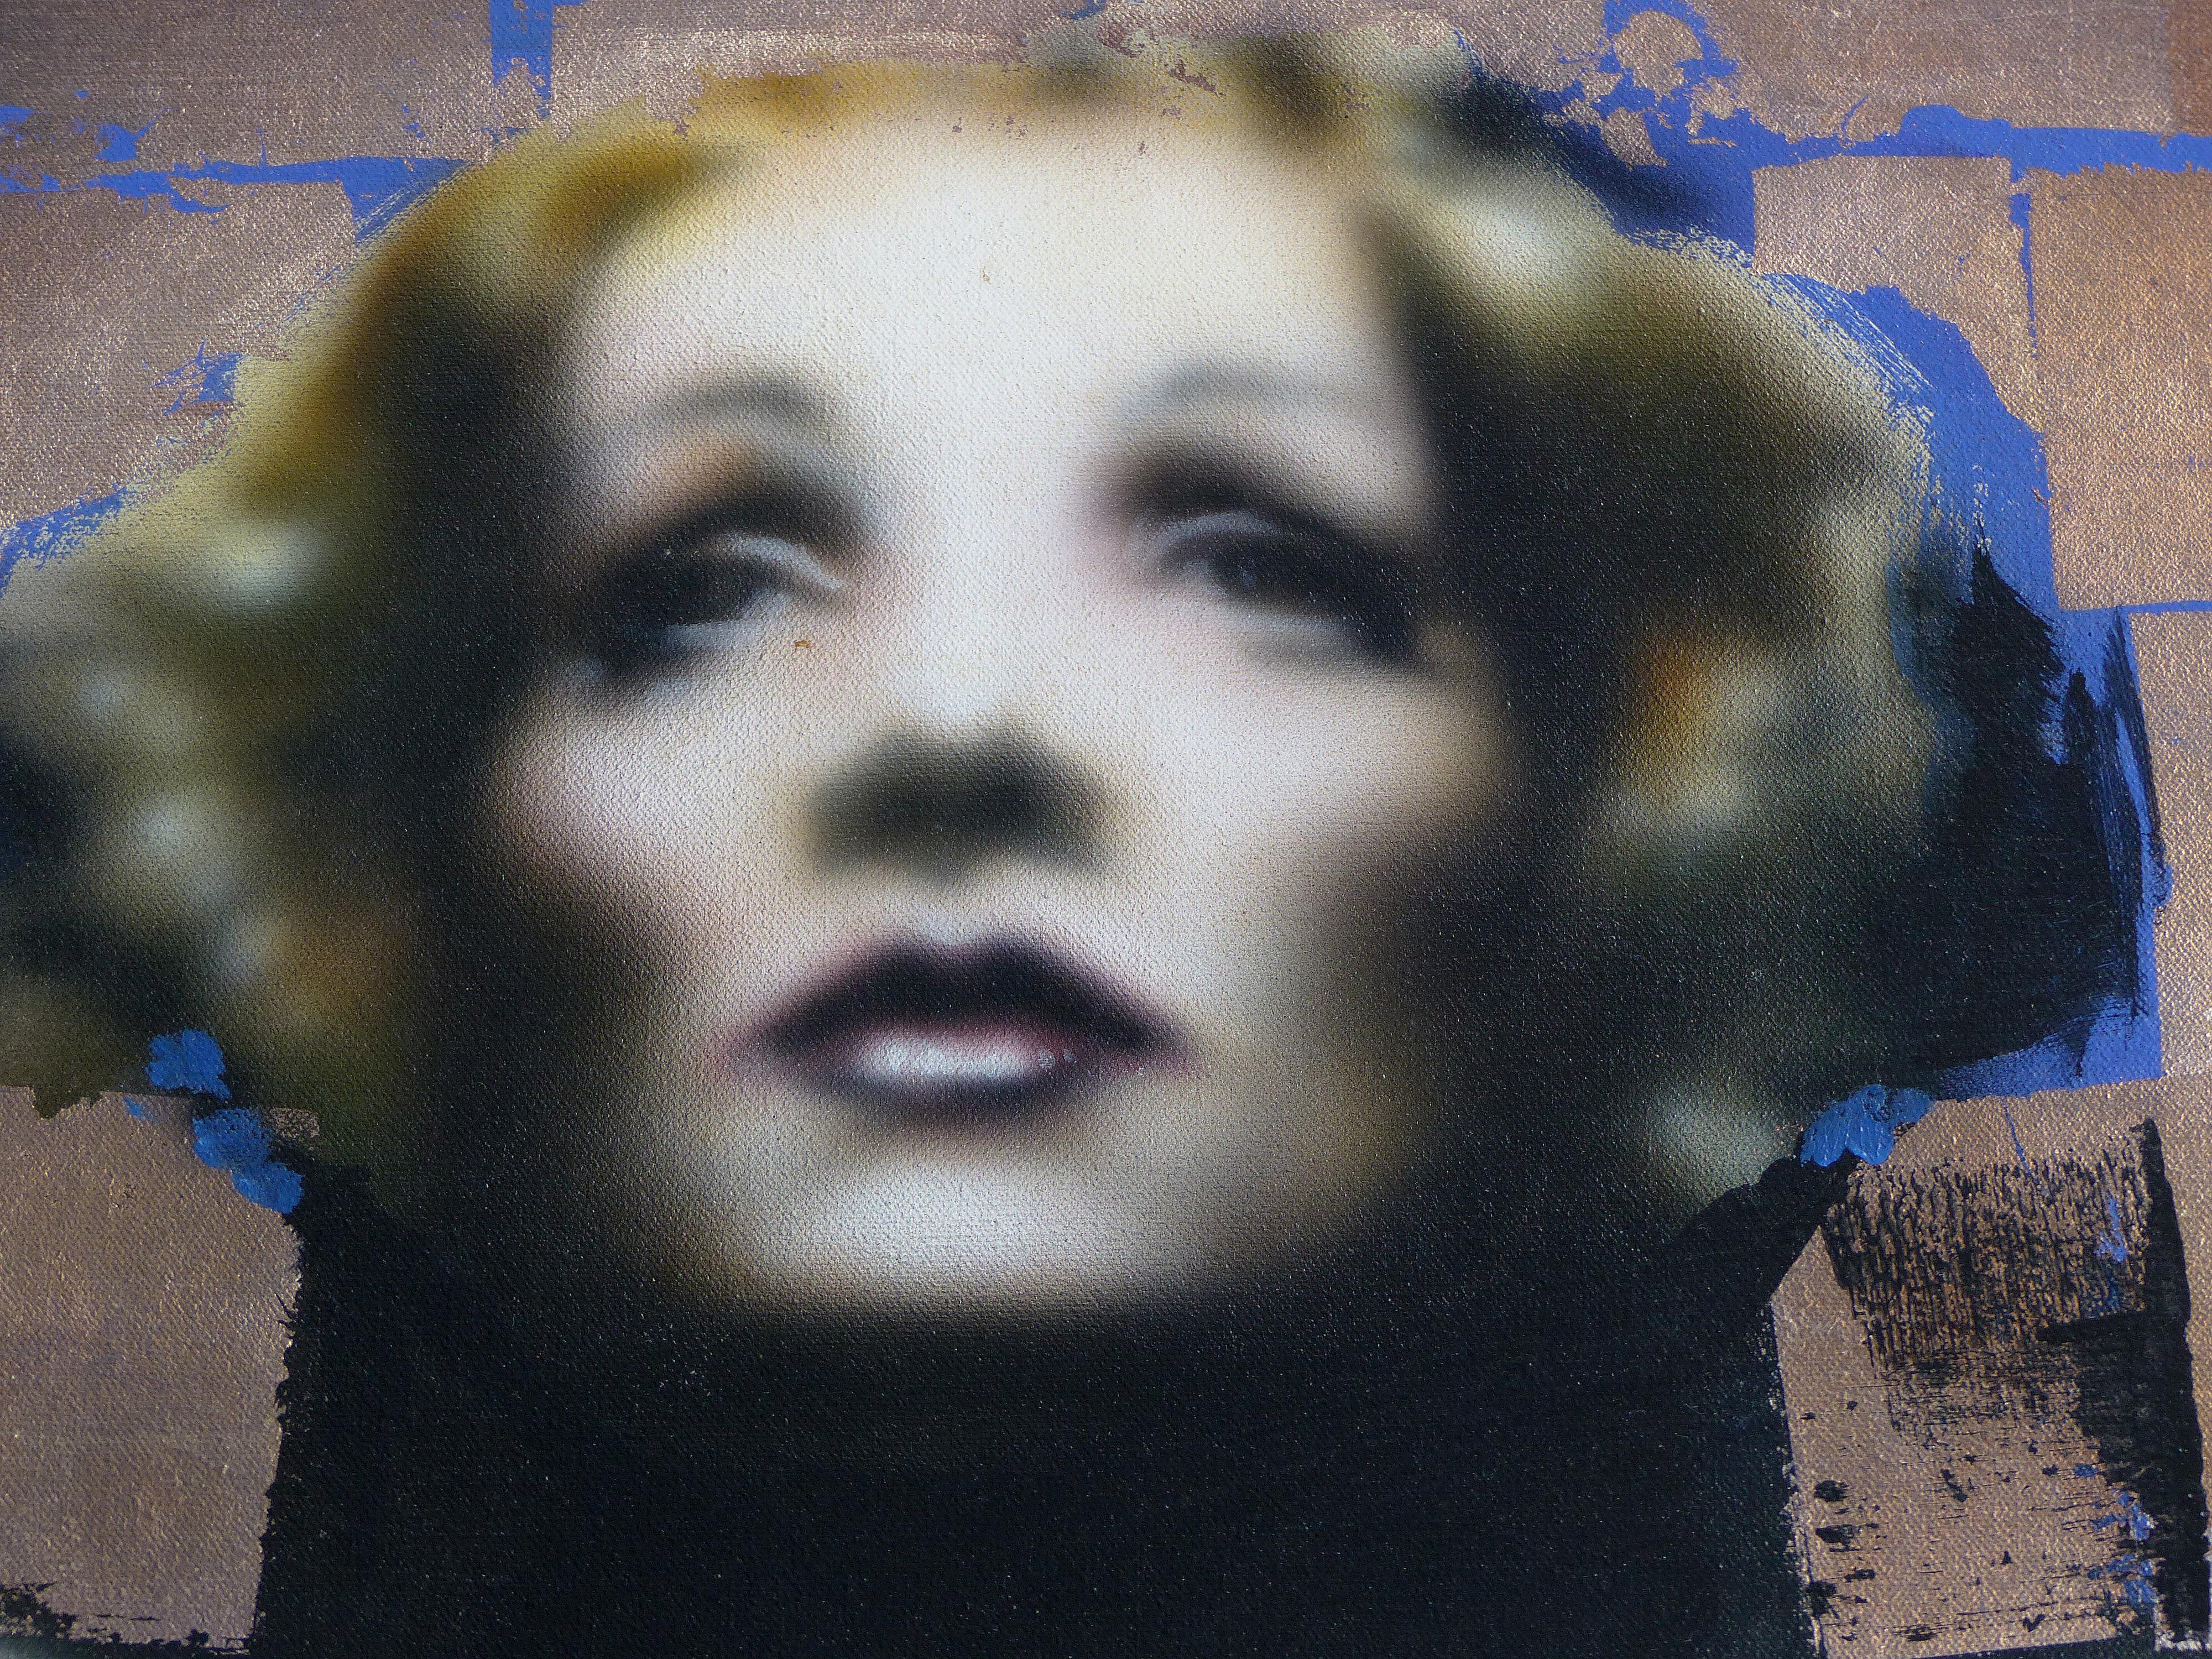 Marlene Dietrich Giclee on Canvas Signed West and Dated '82

Offered for sale is a vintage photograph of Marlene Dietrich transferred to a canvas with the technique of Giclee. Signed lower right West and dated. Wired and ready to be hung.